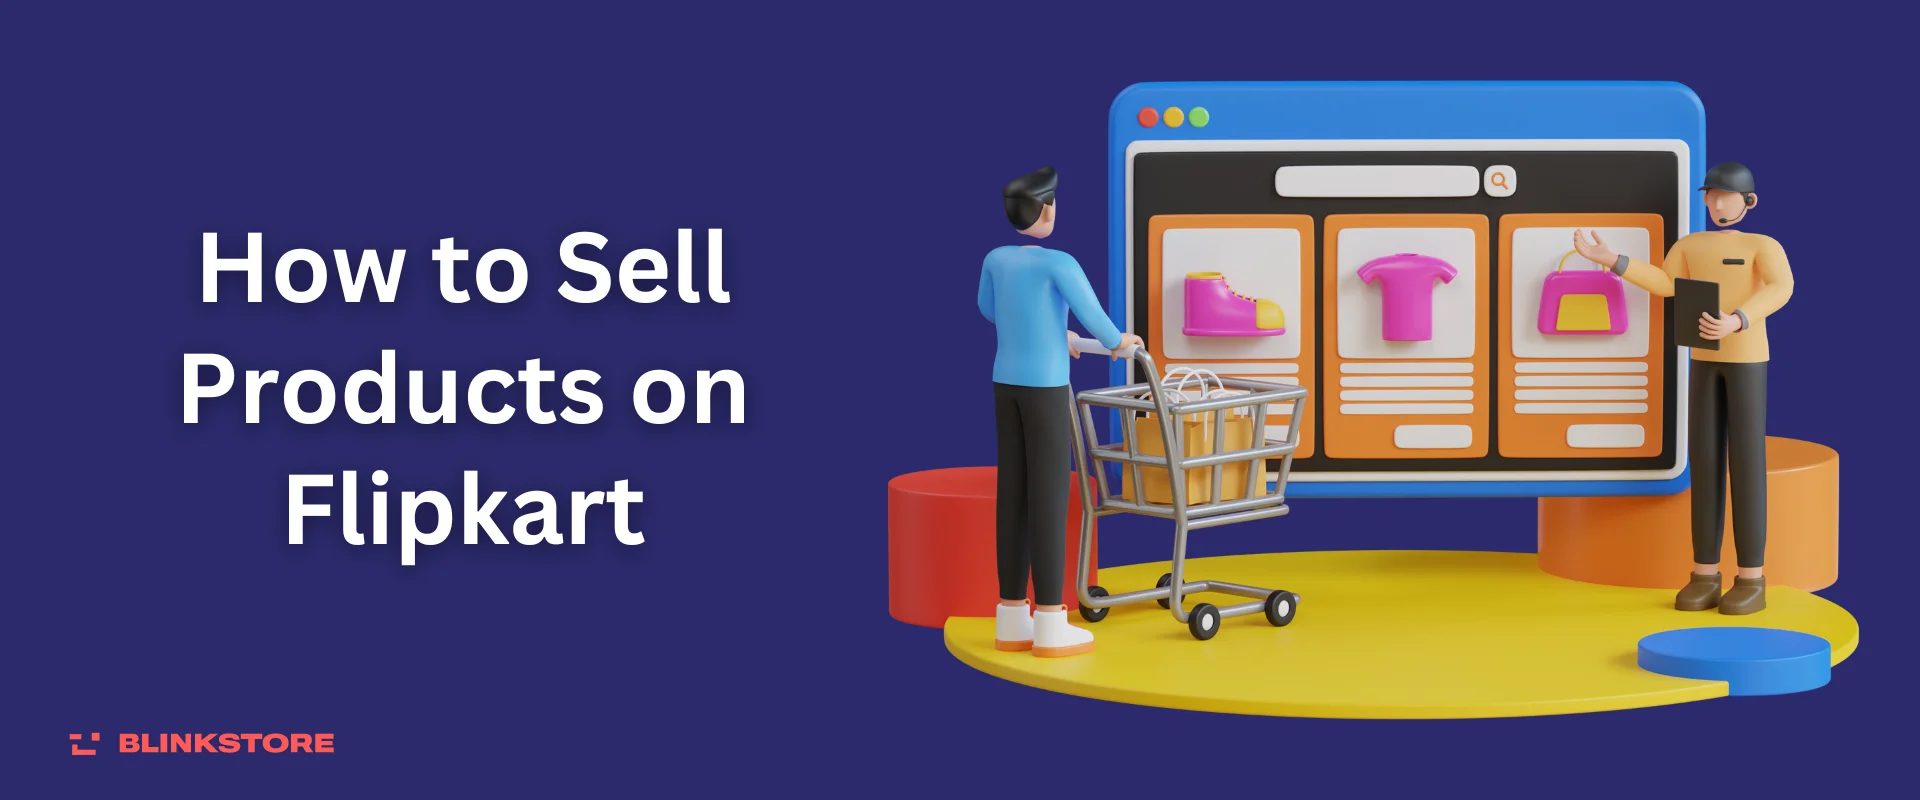 How to Sell Products on Flipkart